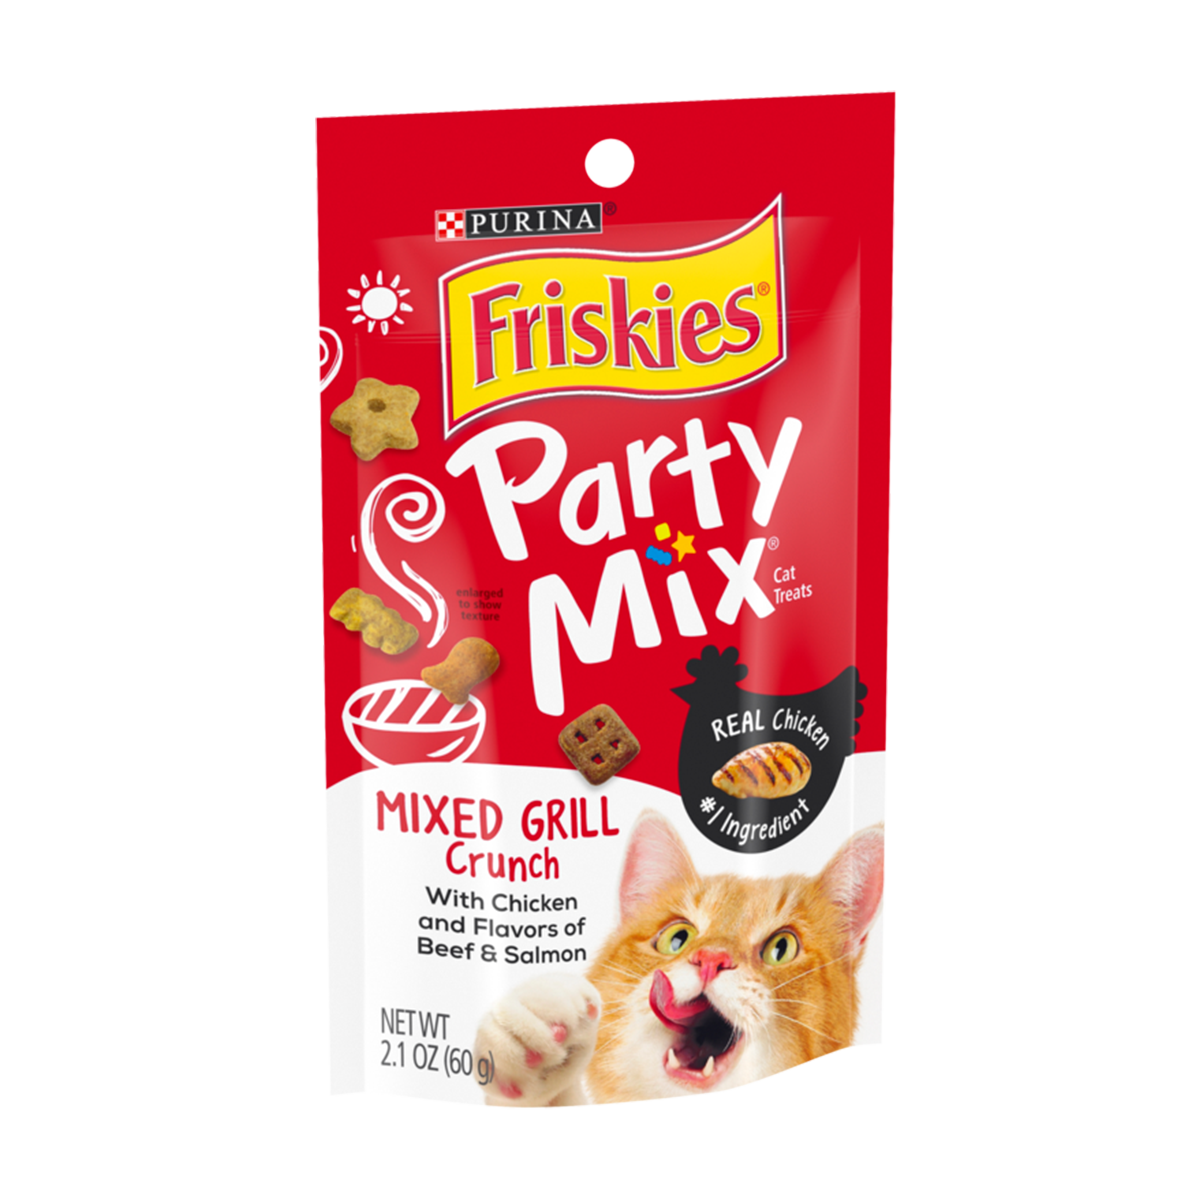 purina-friskies-party-mix-mixed-grill-crunch.png